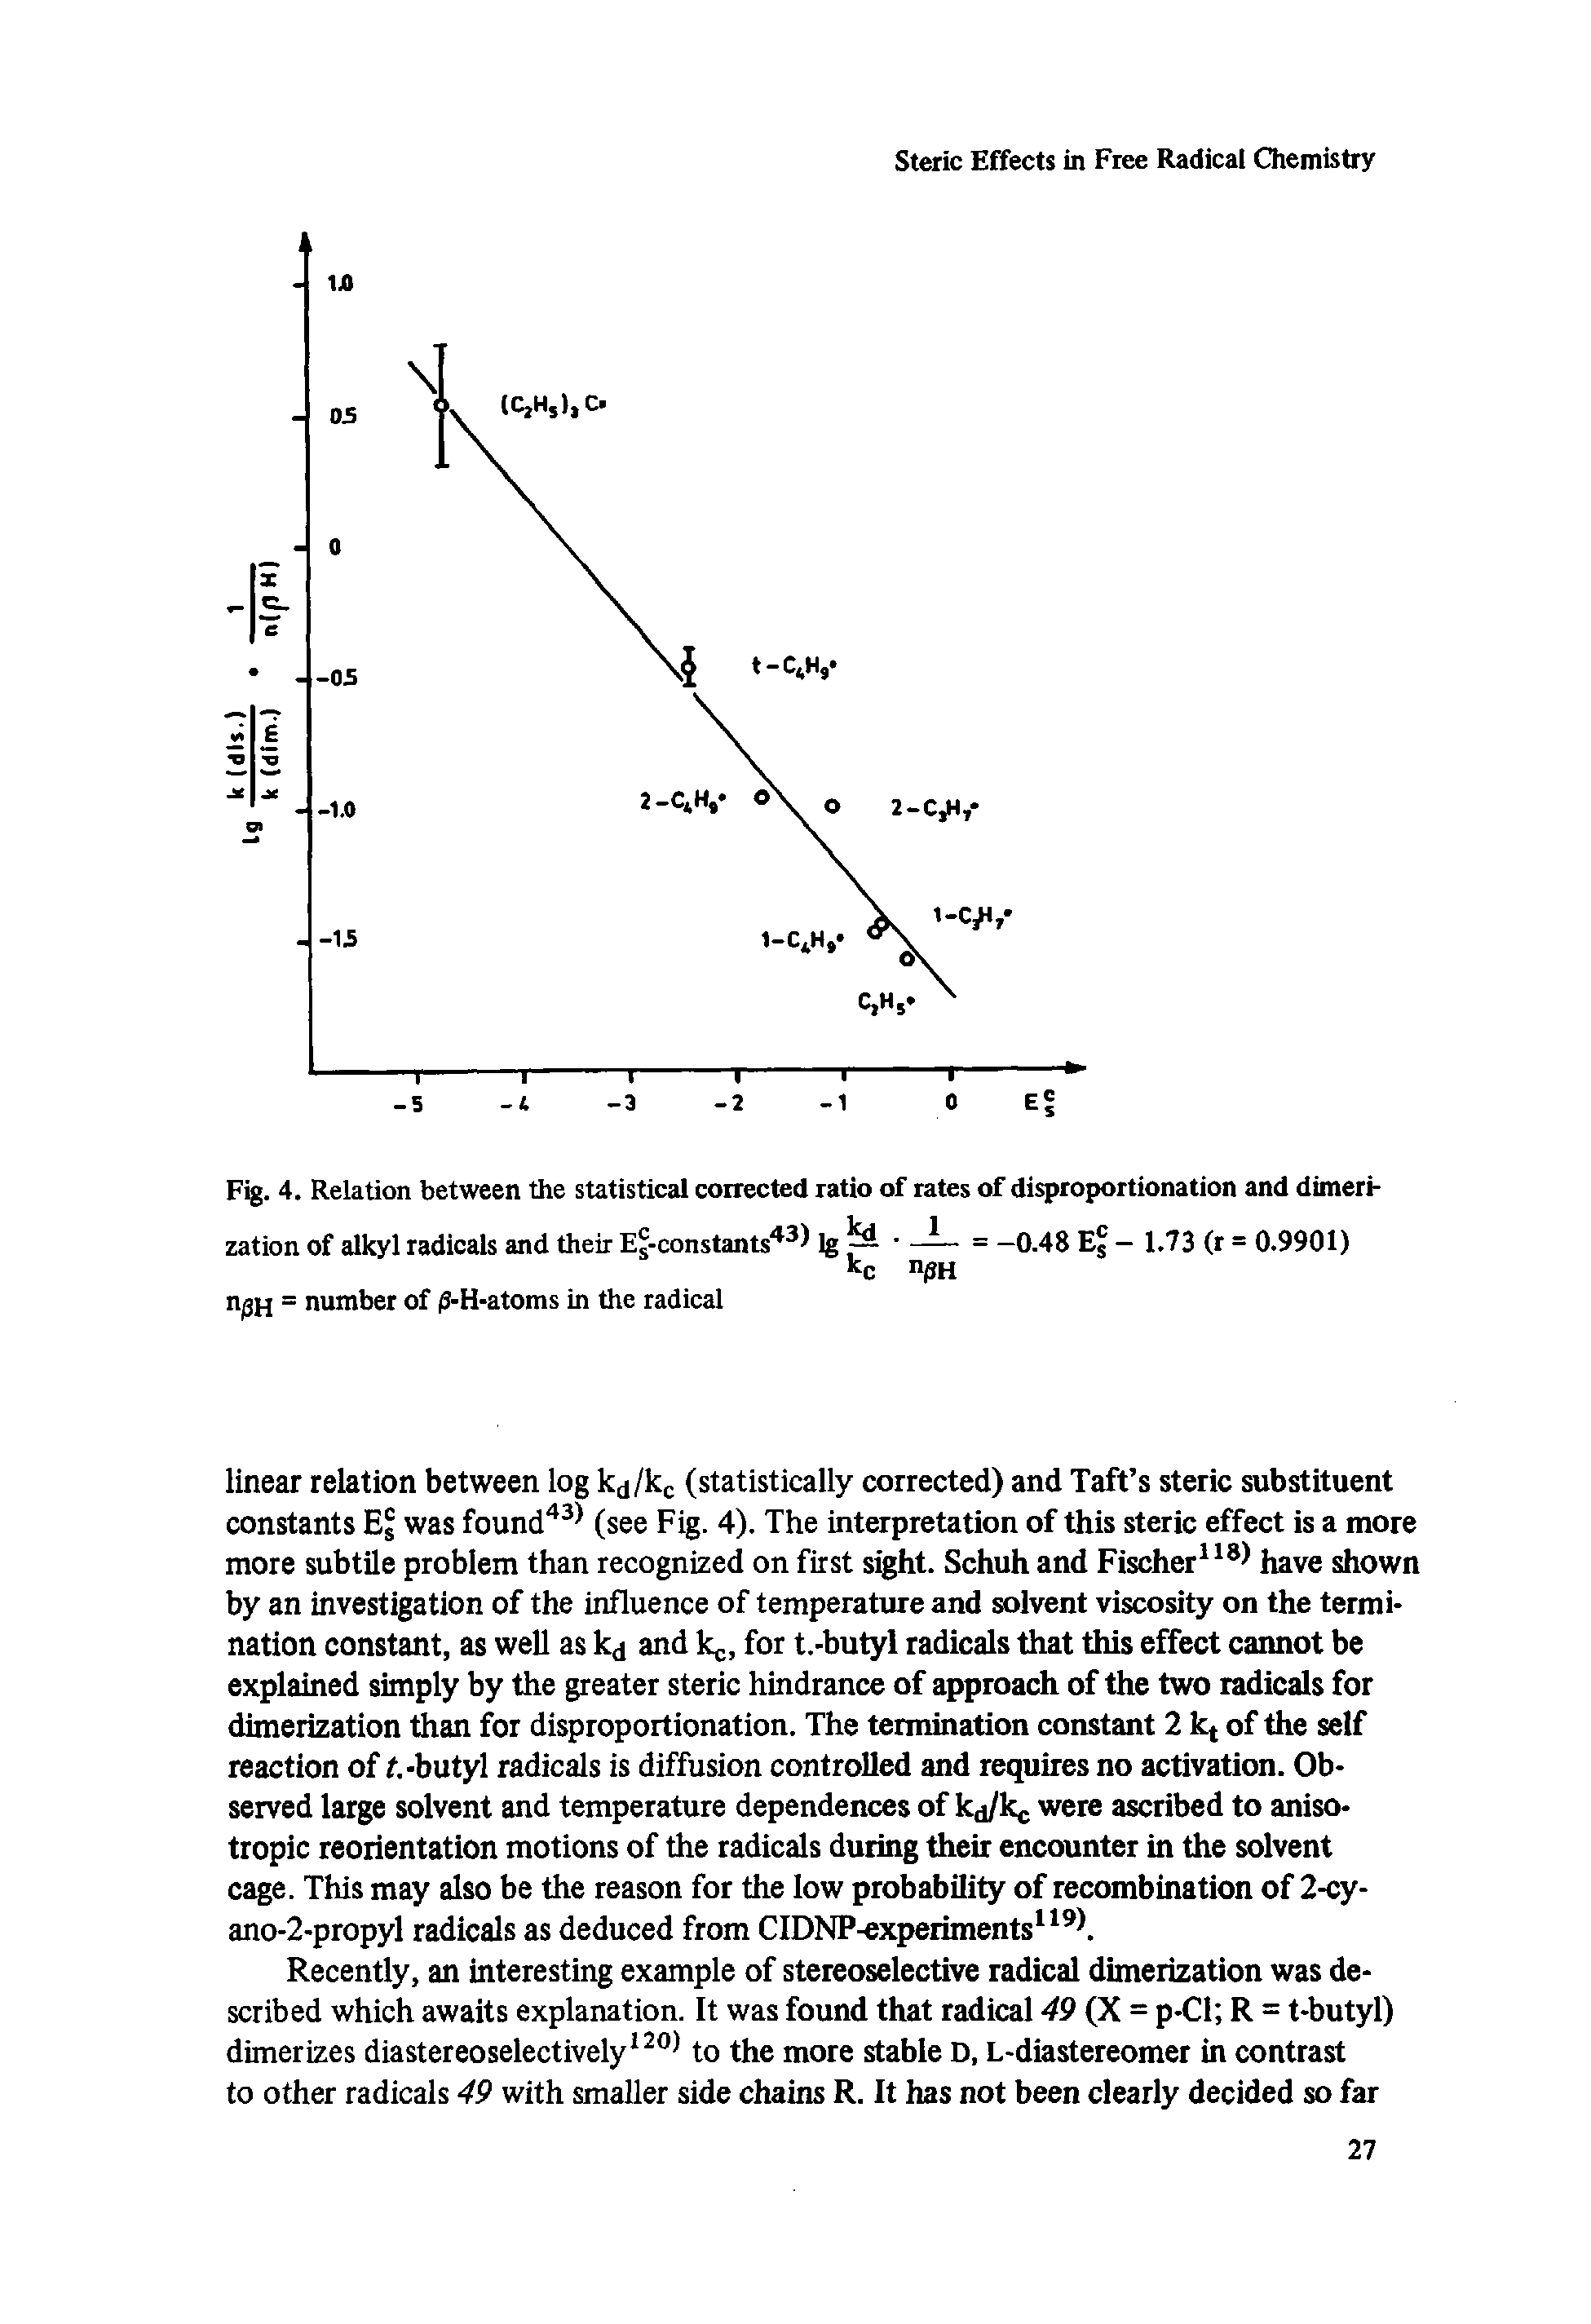 Fig. 4. Relation between the statistical corrected ratio of rates of disproportionation and dimerization of alkyl radicals and their Es-constants Ig = -0.48 Eg - 1.73 (r = 0.9901)...